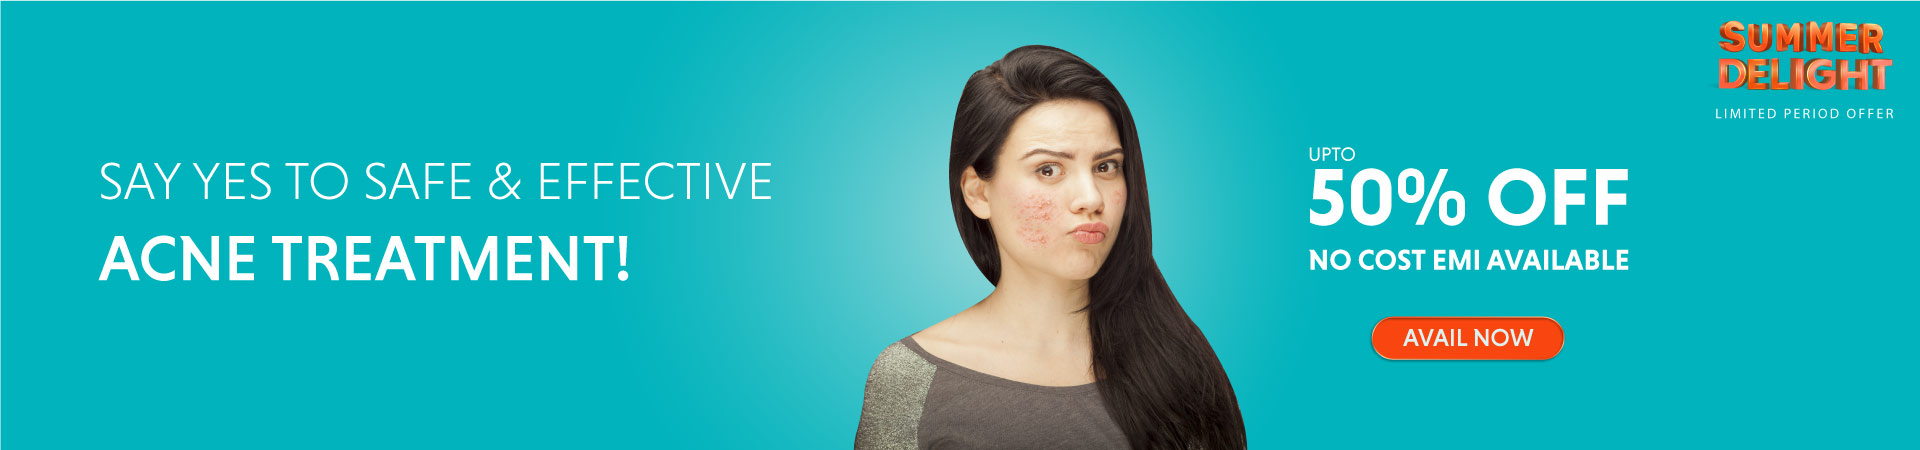 Acne Treatment Offer Banner